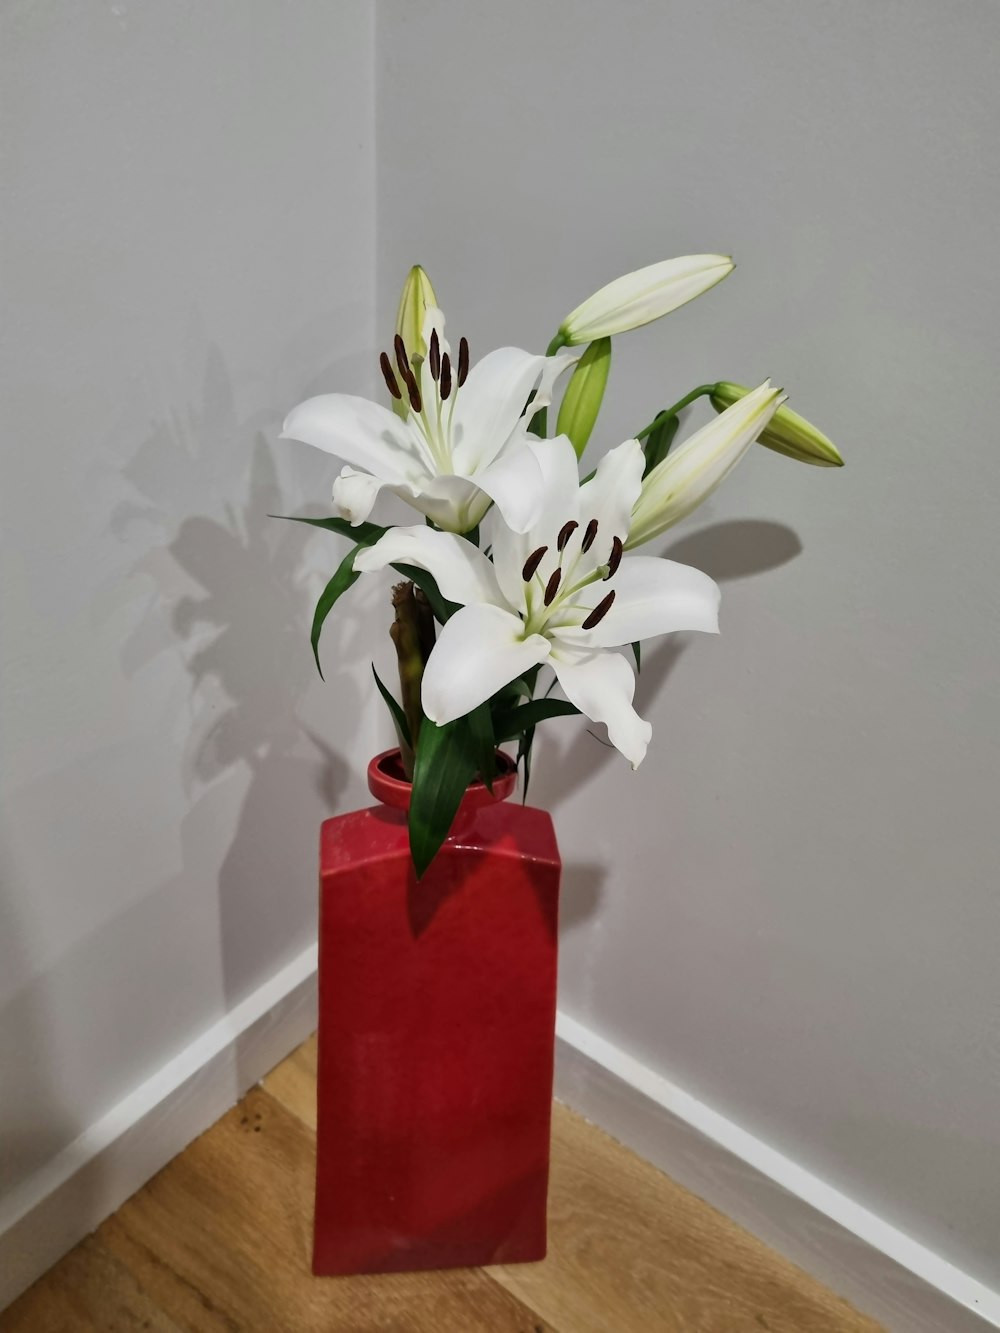 a red vase filled with white flowers on top of a wooden floor